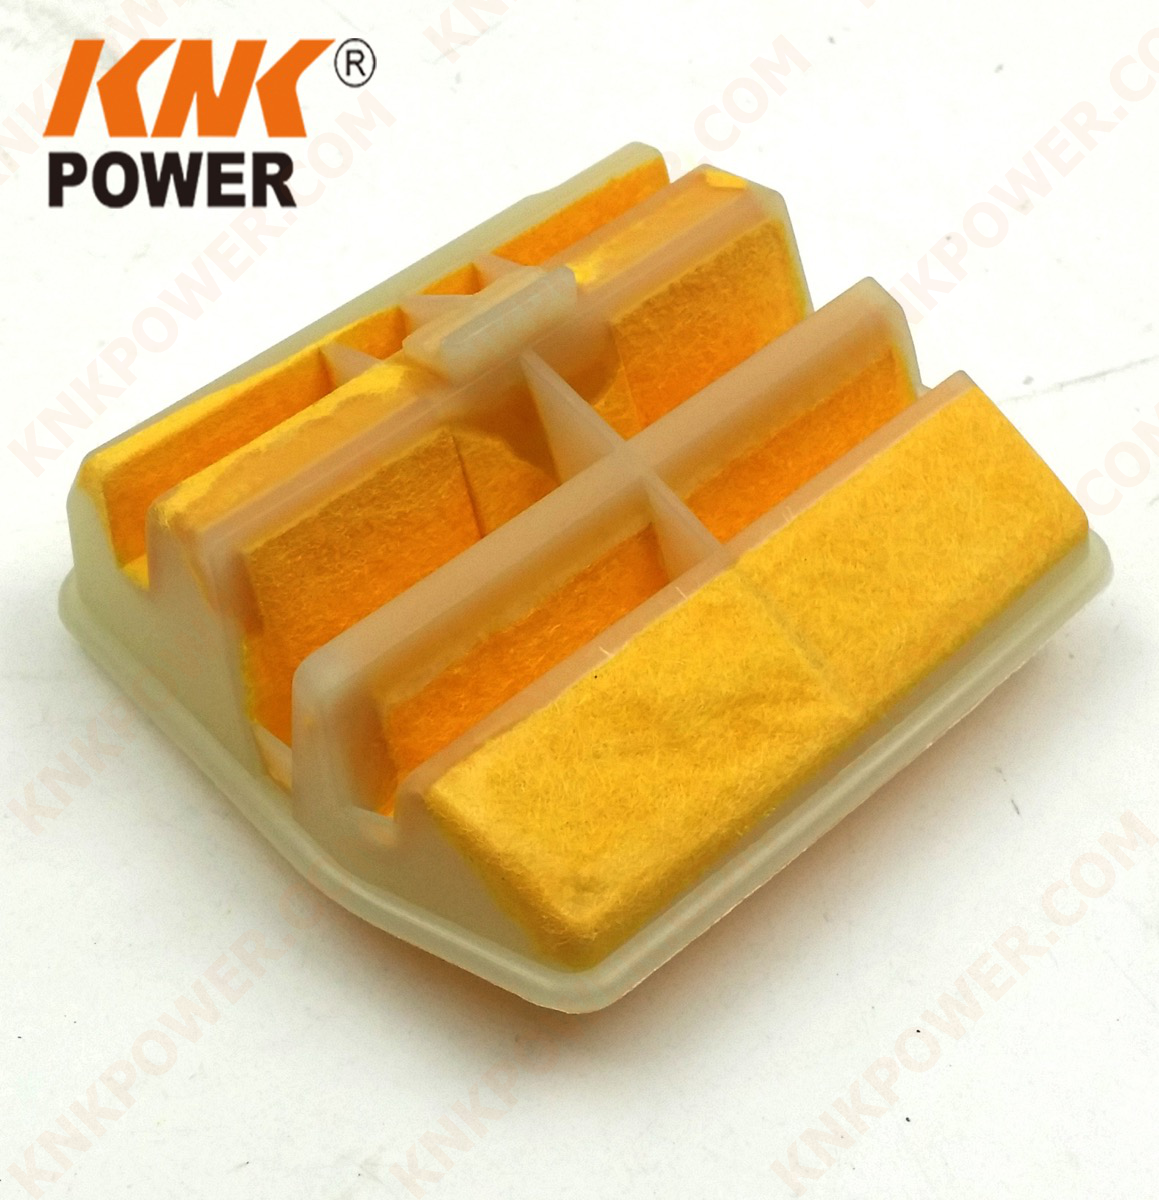 knkpower product image 19036 